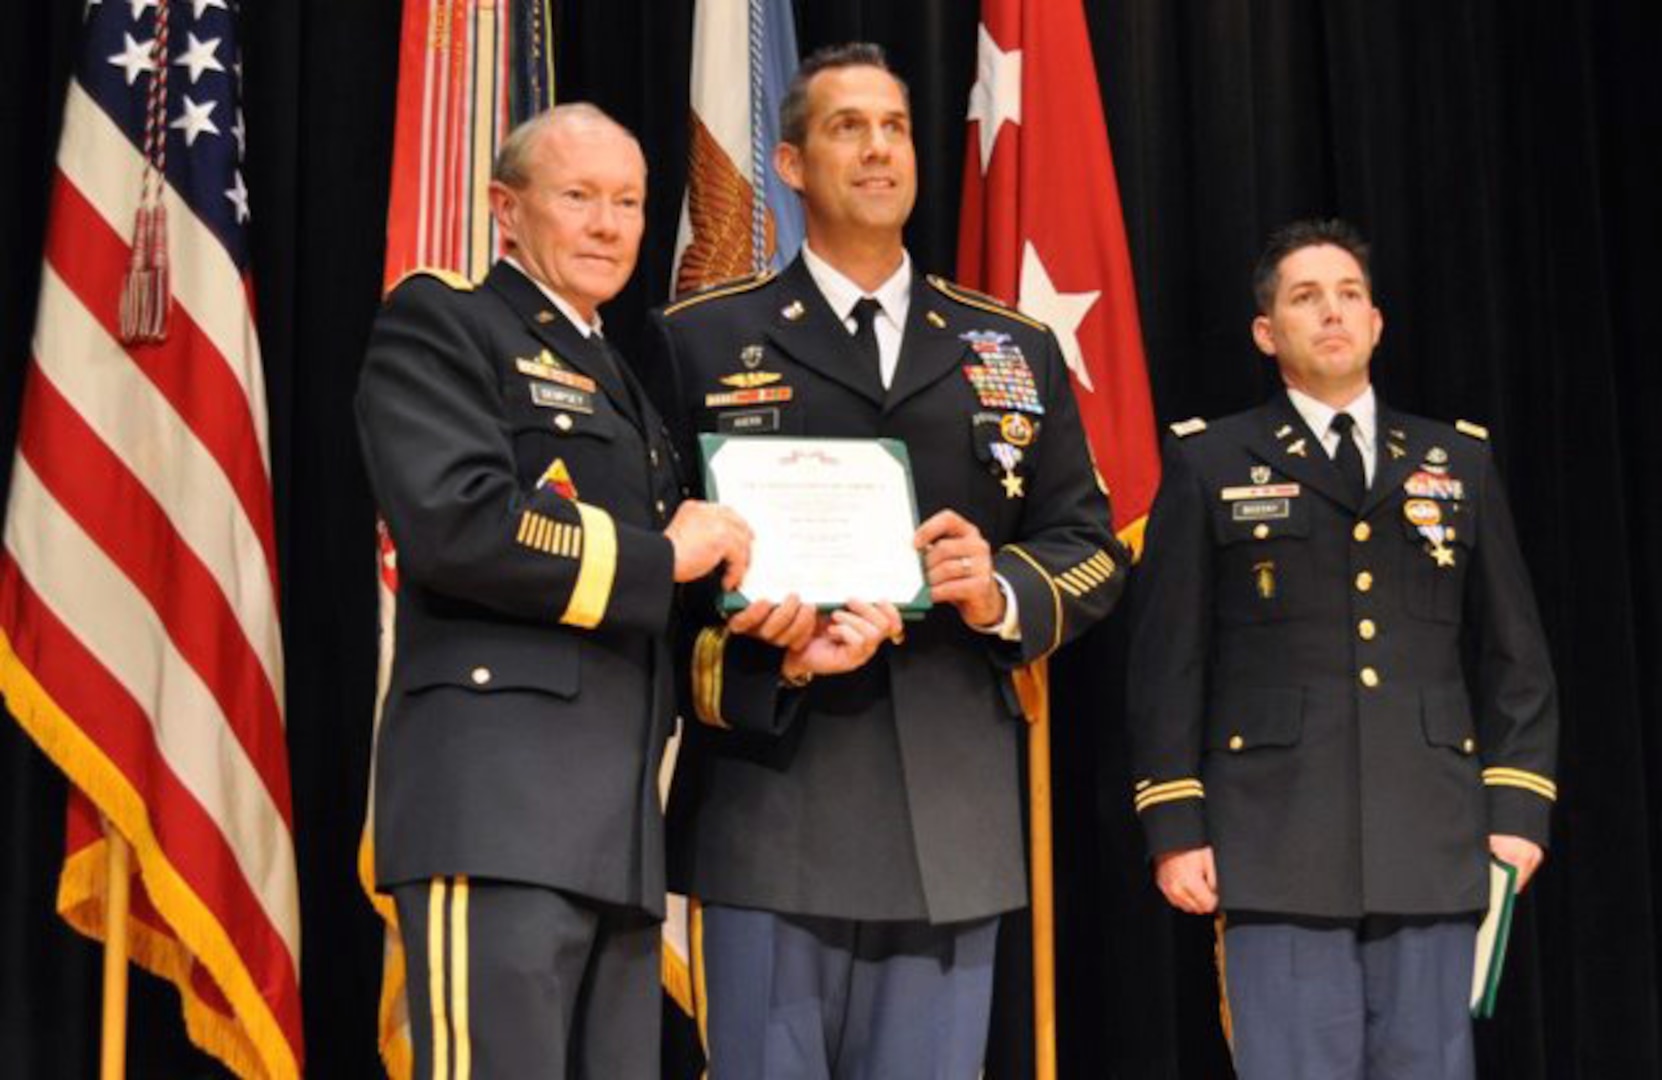 Army Gen. Martin E. Dempsey, chairman of the Joint Chiefs of Staff, awards Army Sgt. 1st Class Ryan Ahern, with Company A, 2nd Battalion, 20th Special Forces Group (Airborne), the Silver Star at the Pritzker Military Library in Chicago, May 19, 2012. Ahern was awarded the Silver Star for saving the lives of his injured teammates in Afghanistan in 2009. He thanked members of his unit and his family for the sacrifices they made during his deployment. Also pictured is Army Capt. Tom Bozzay, with Company A, 2nd Battalion, 20th SFG (Airborne), who received the Silver Star from Dempsey as well.